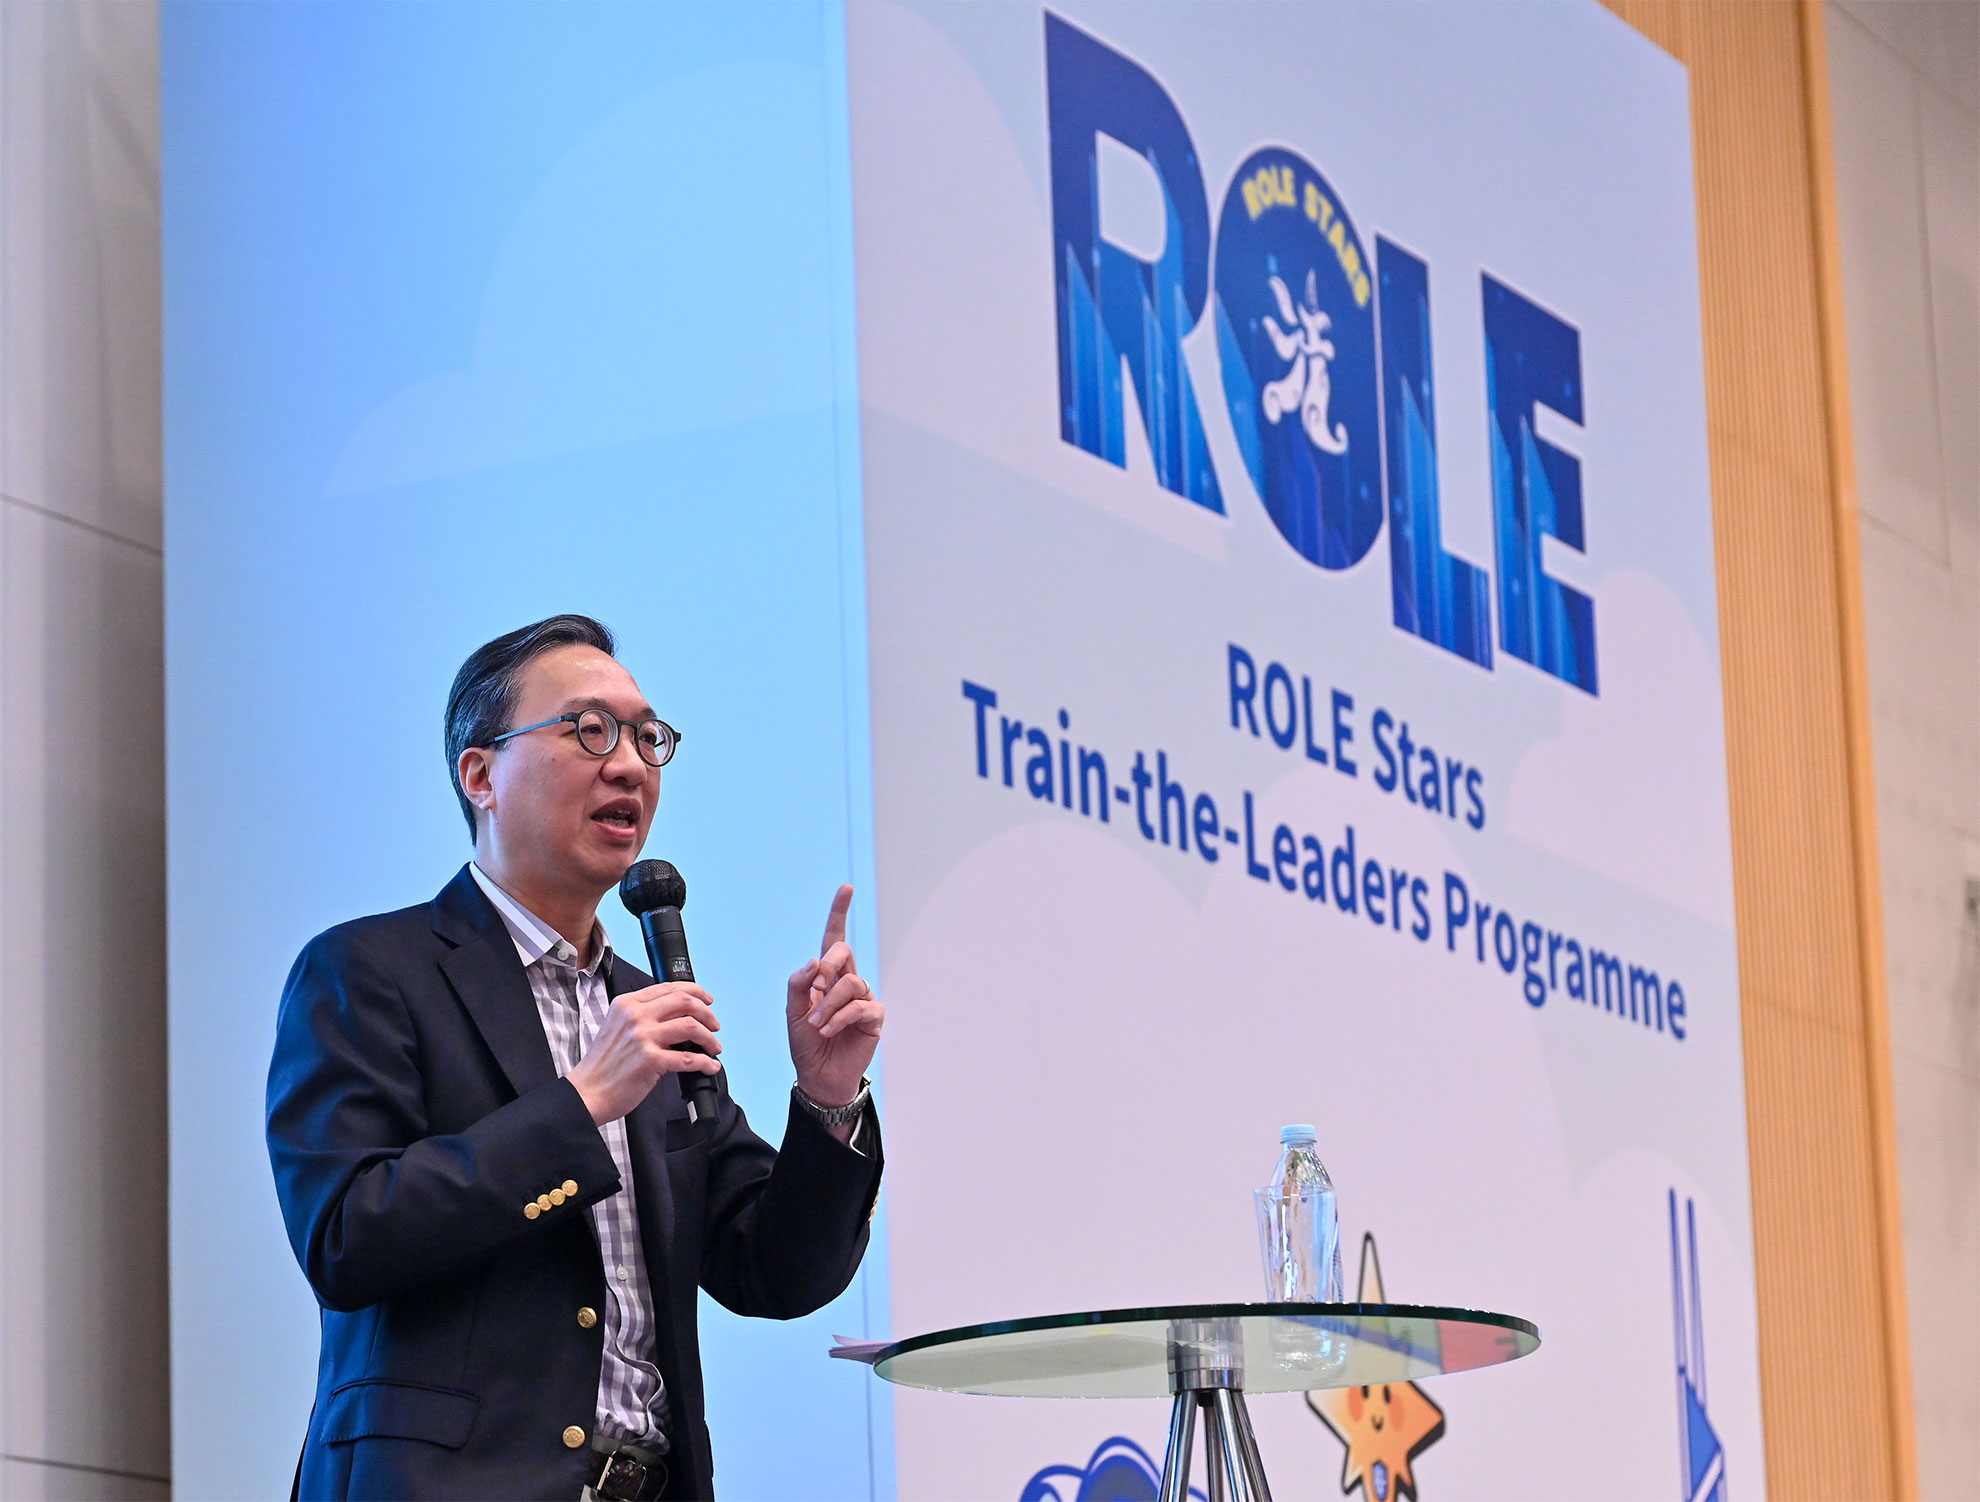 The first phase of the Rule of Law Education Train-the-Leaders Programme, themed "Rule of Law Education Stars", was launched today (November 25) by the Department of Justice. Photo shows the Secretary for Justice, Mr Paul Lam, SC, giving a lecture on the topic "rule of law and our legal system".